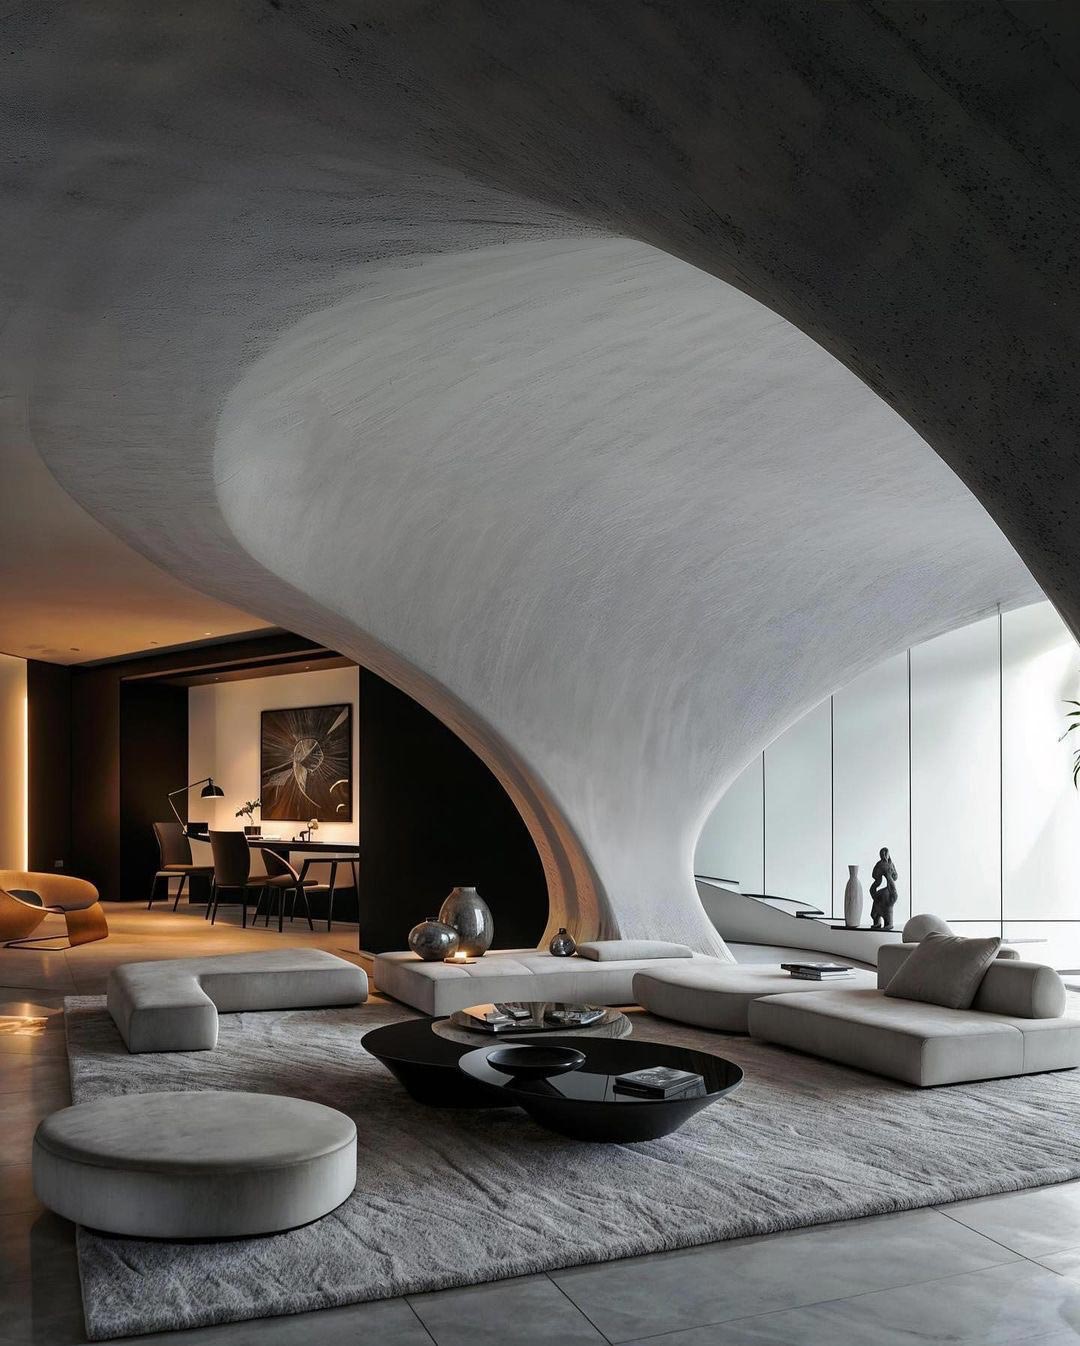 Square living room couch and curved walls